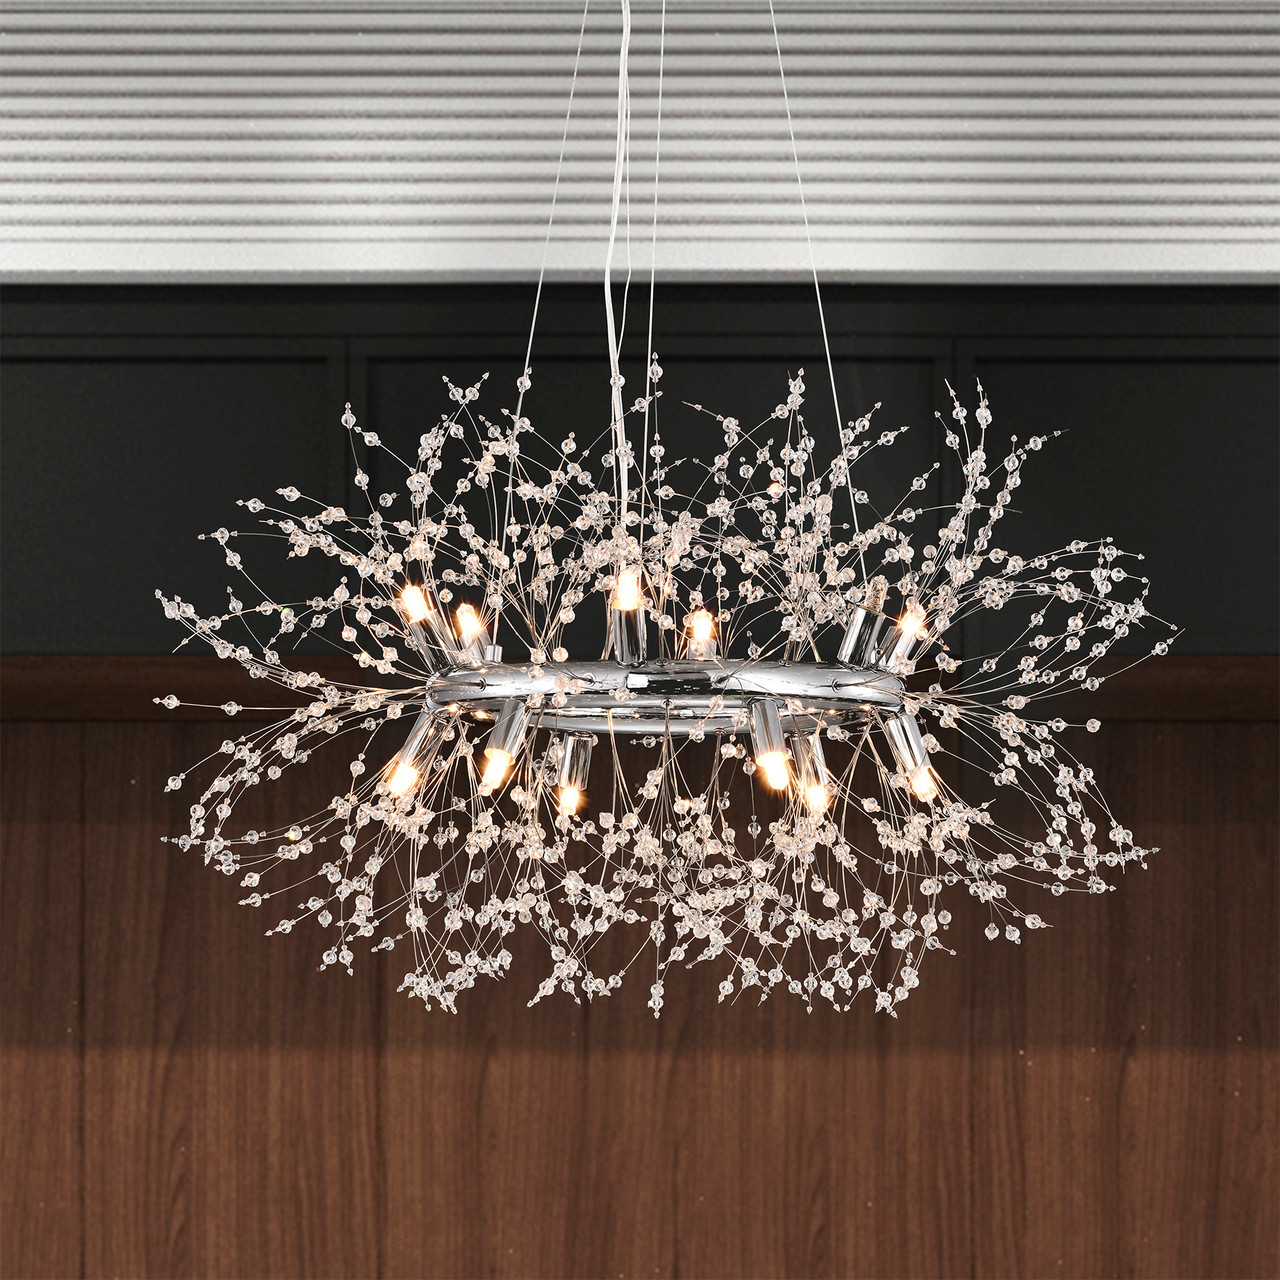 WAREHOUSE OF TIFFANY 3006/12 Xhosa 30 in. 12-Light Indoor Chrome Finish Chandelier with Light Kit